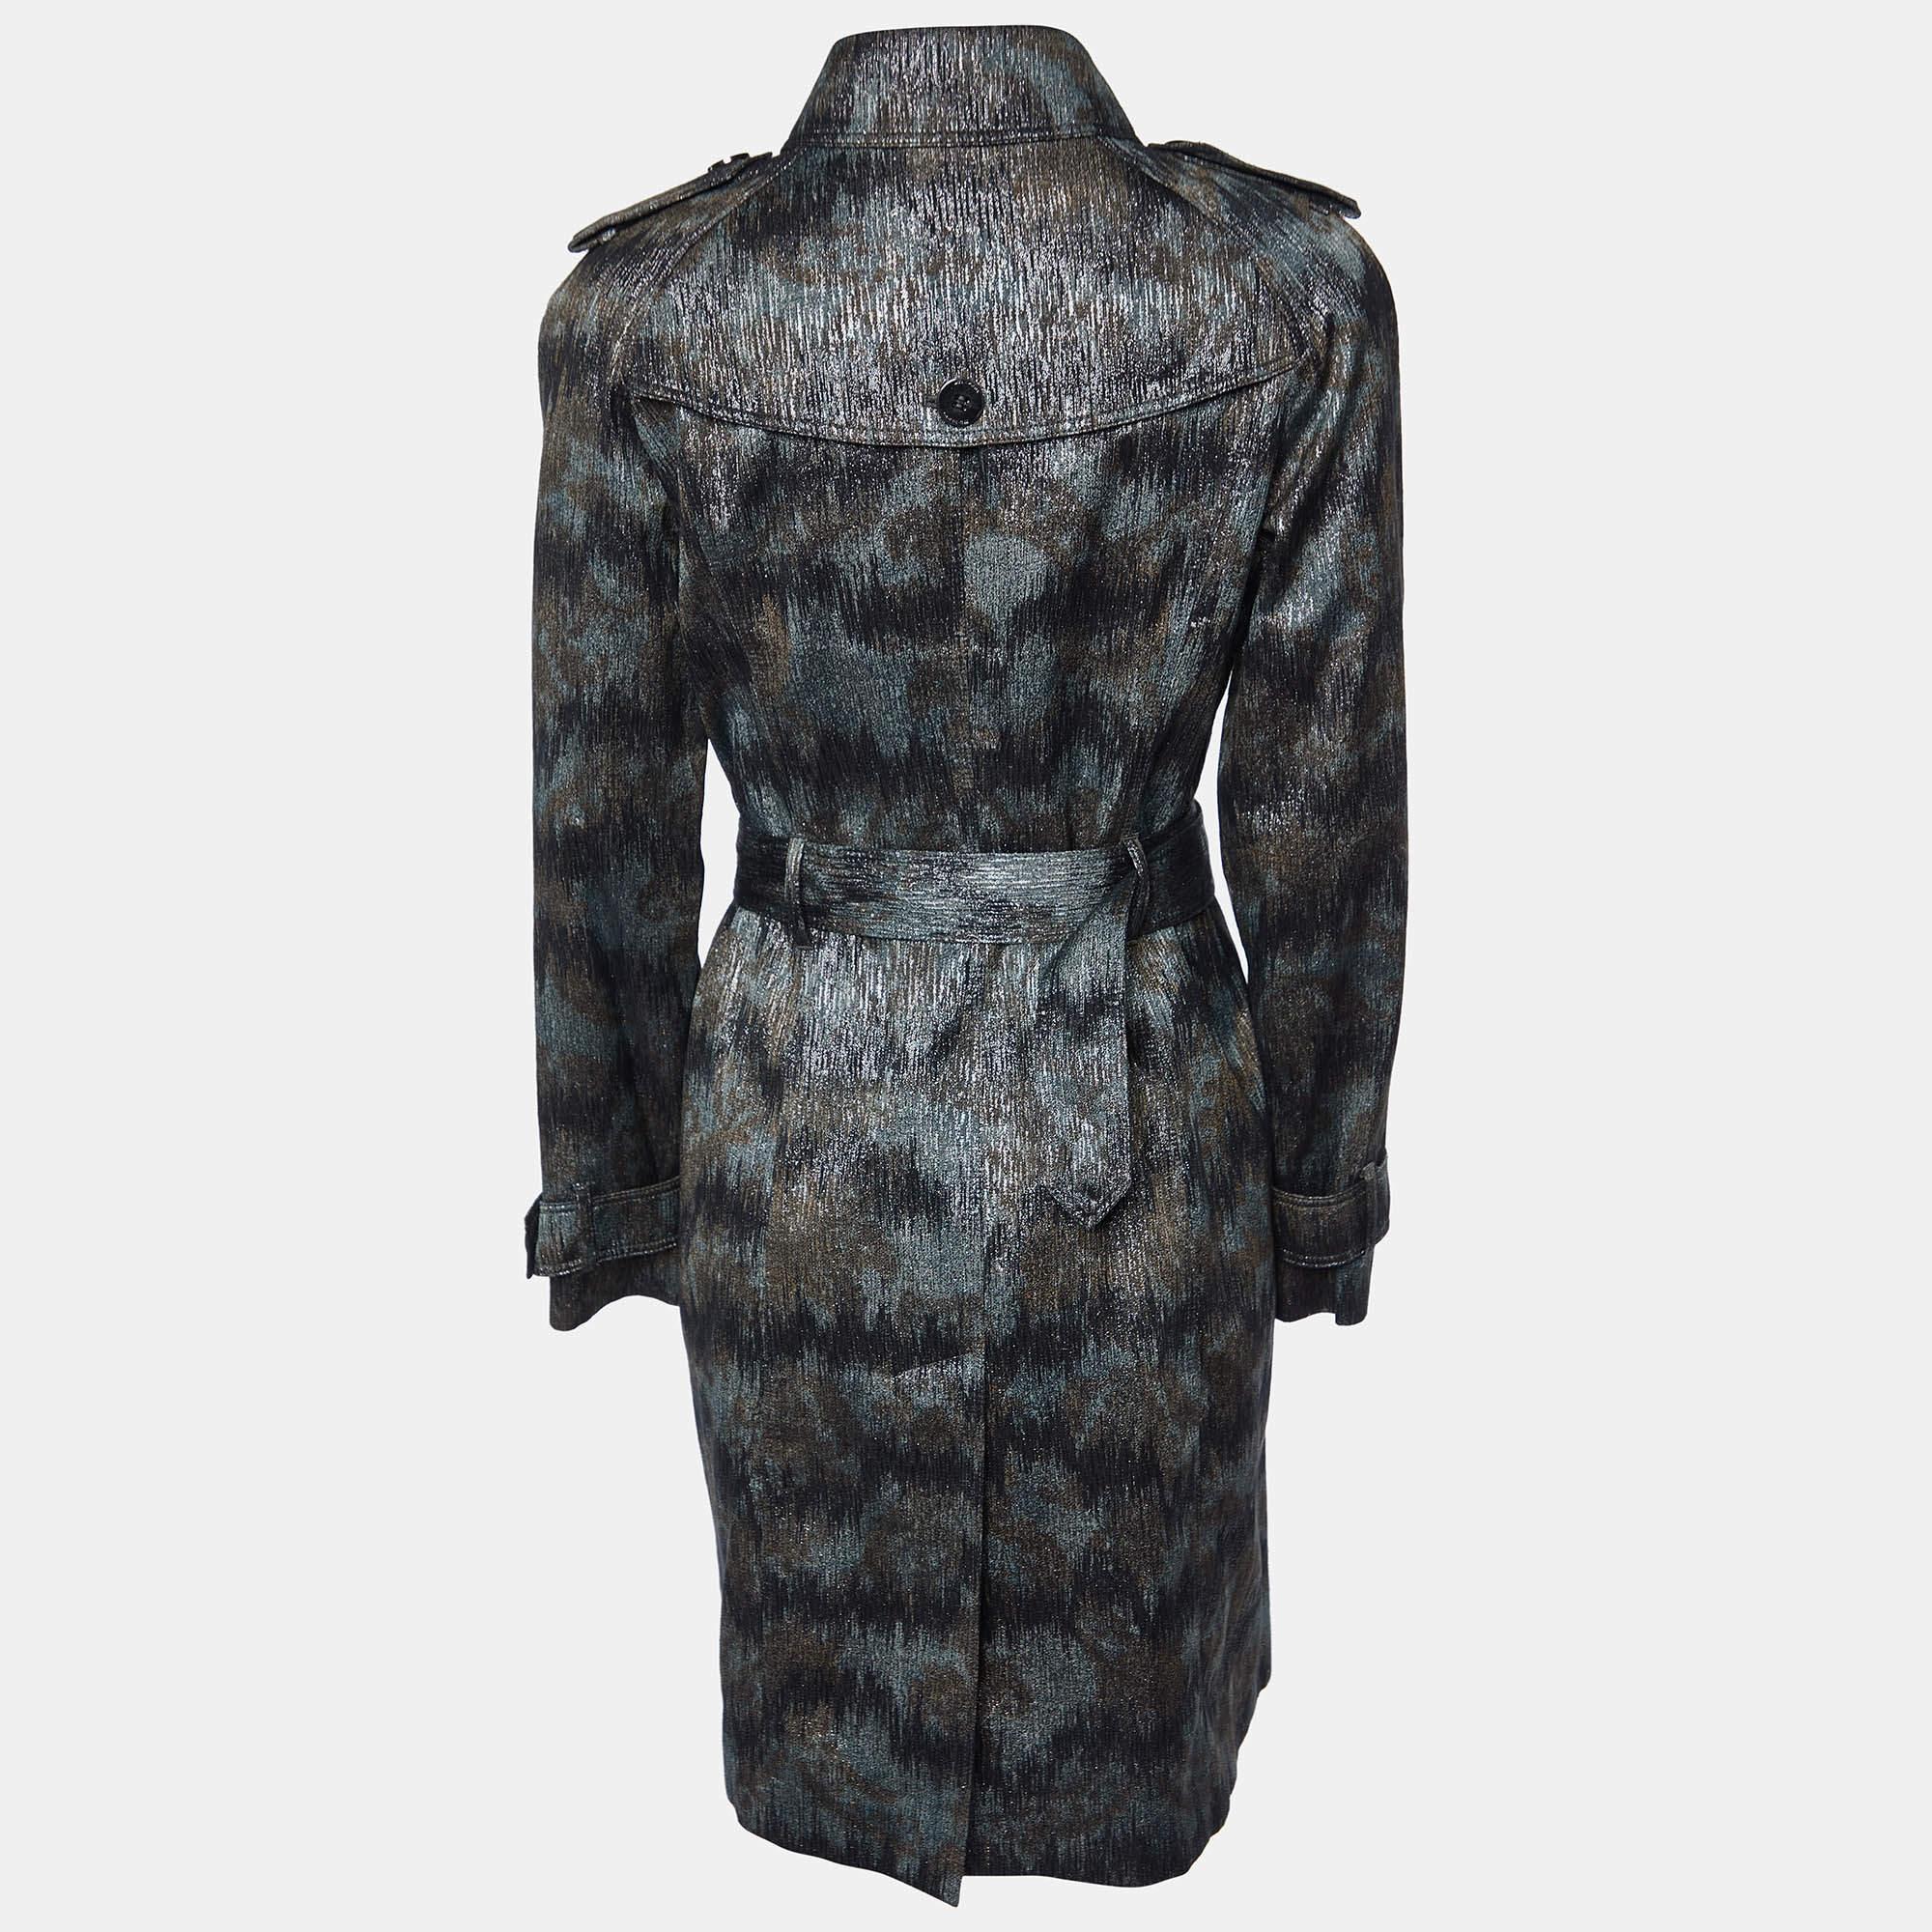 Step out in sophistication with the Burberry coat. Crafted with meticulous attention to detail, this exquisite piece exudes timeless elegance. Its shimmering lurex cotton blend fabric and belted waist effortlessly marry style and functionality,